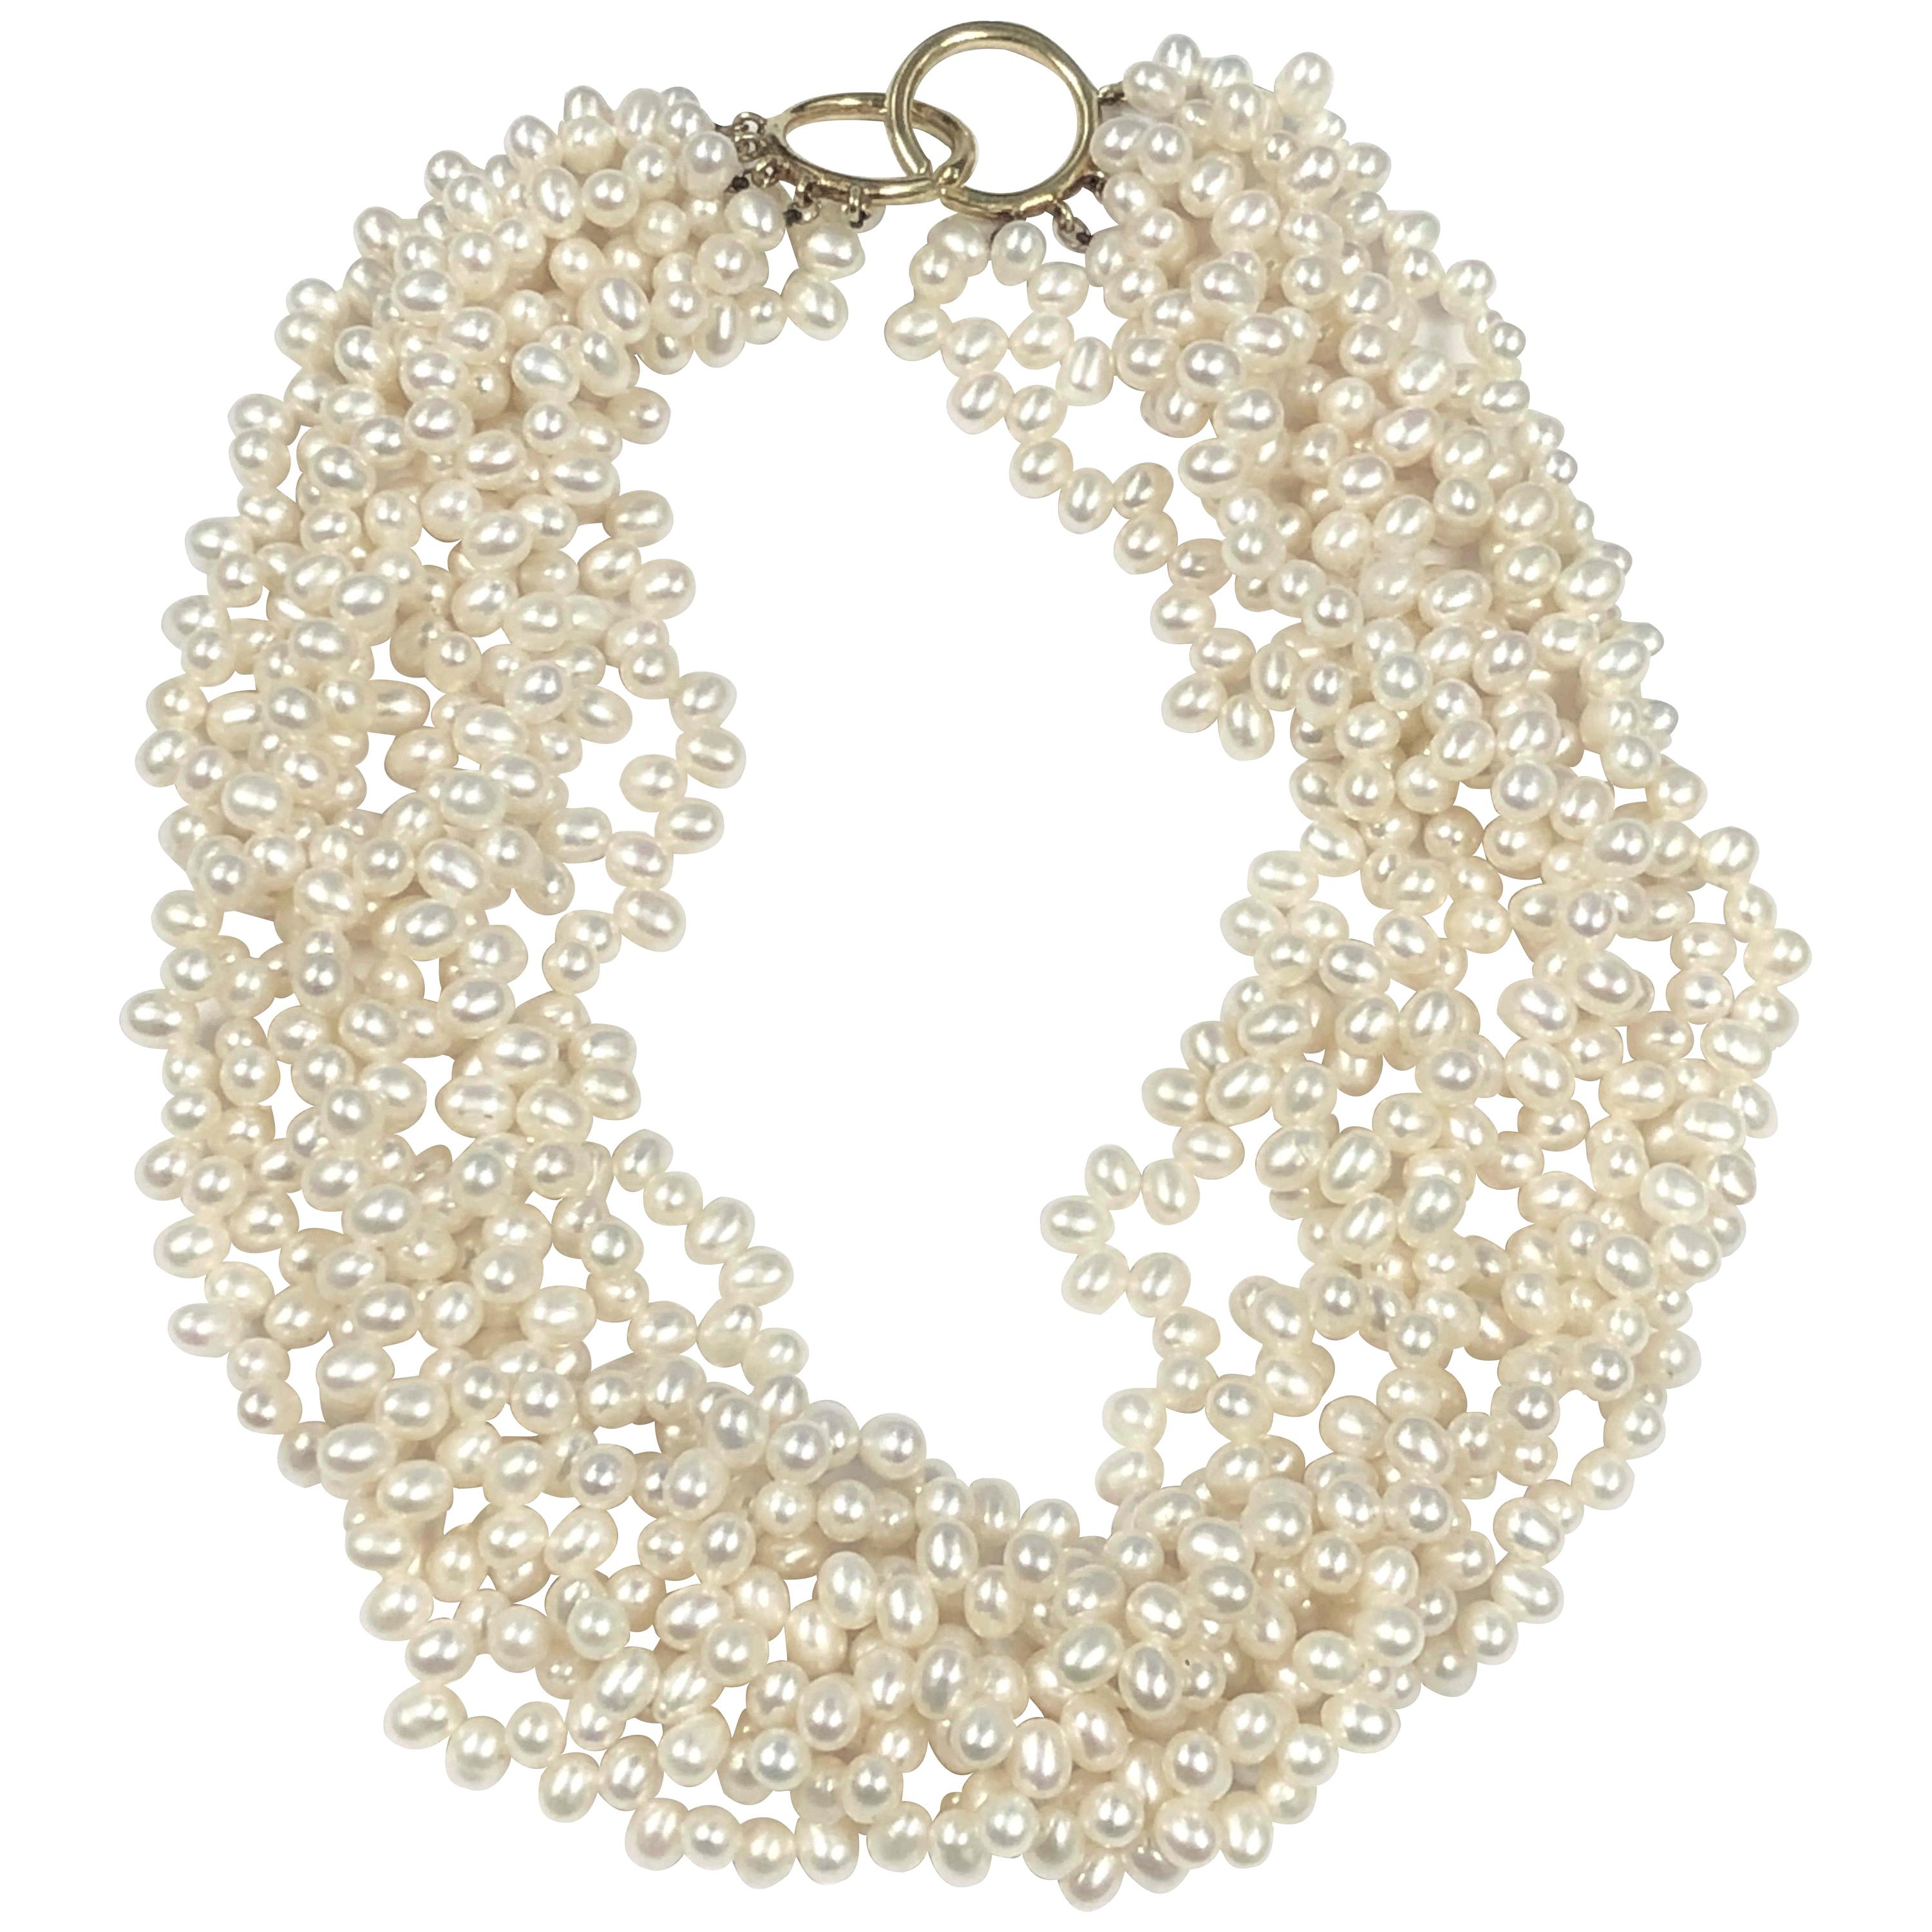 Tiffany & Co. Paloma Picasso Pearl and Gold Torsade Necklace